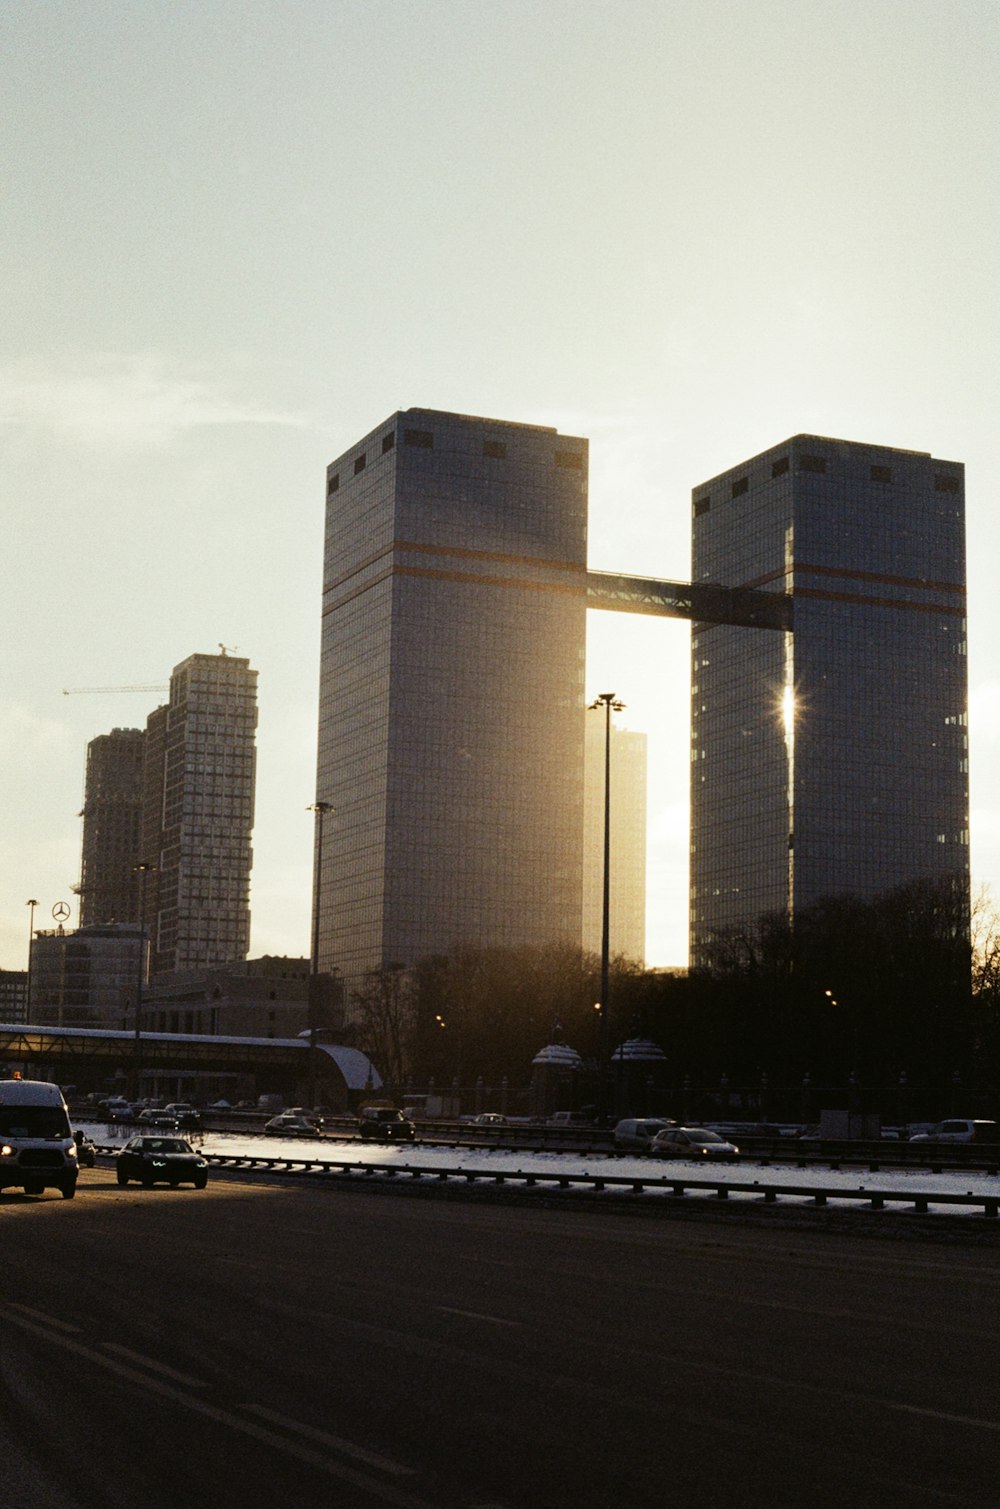 the sun is setting behind the tall buildings